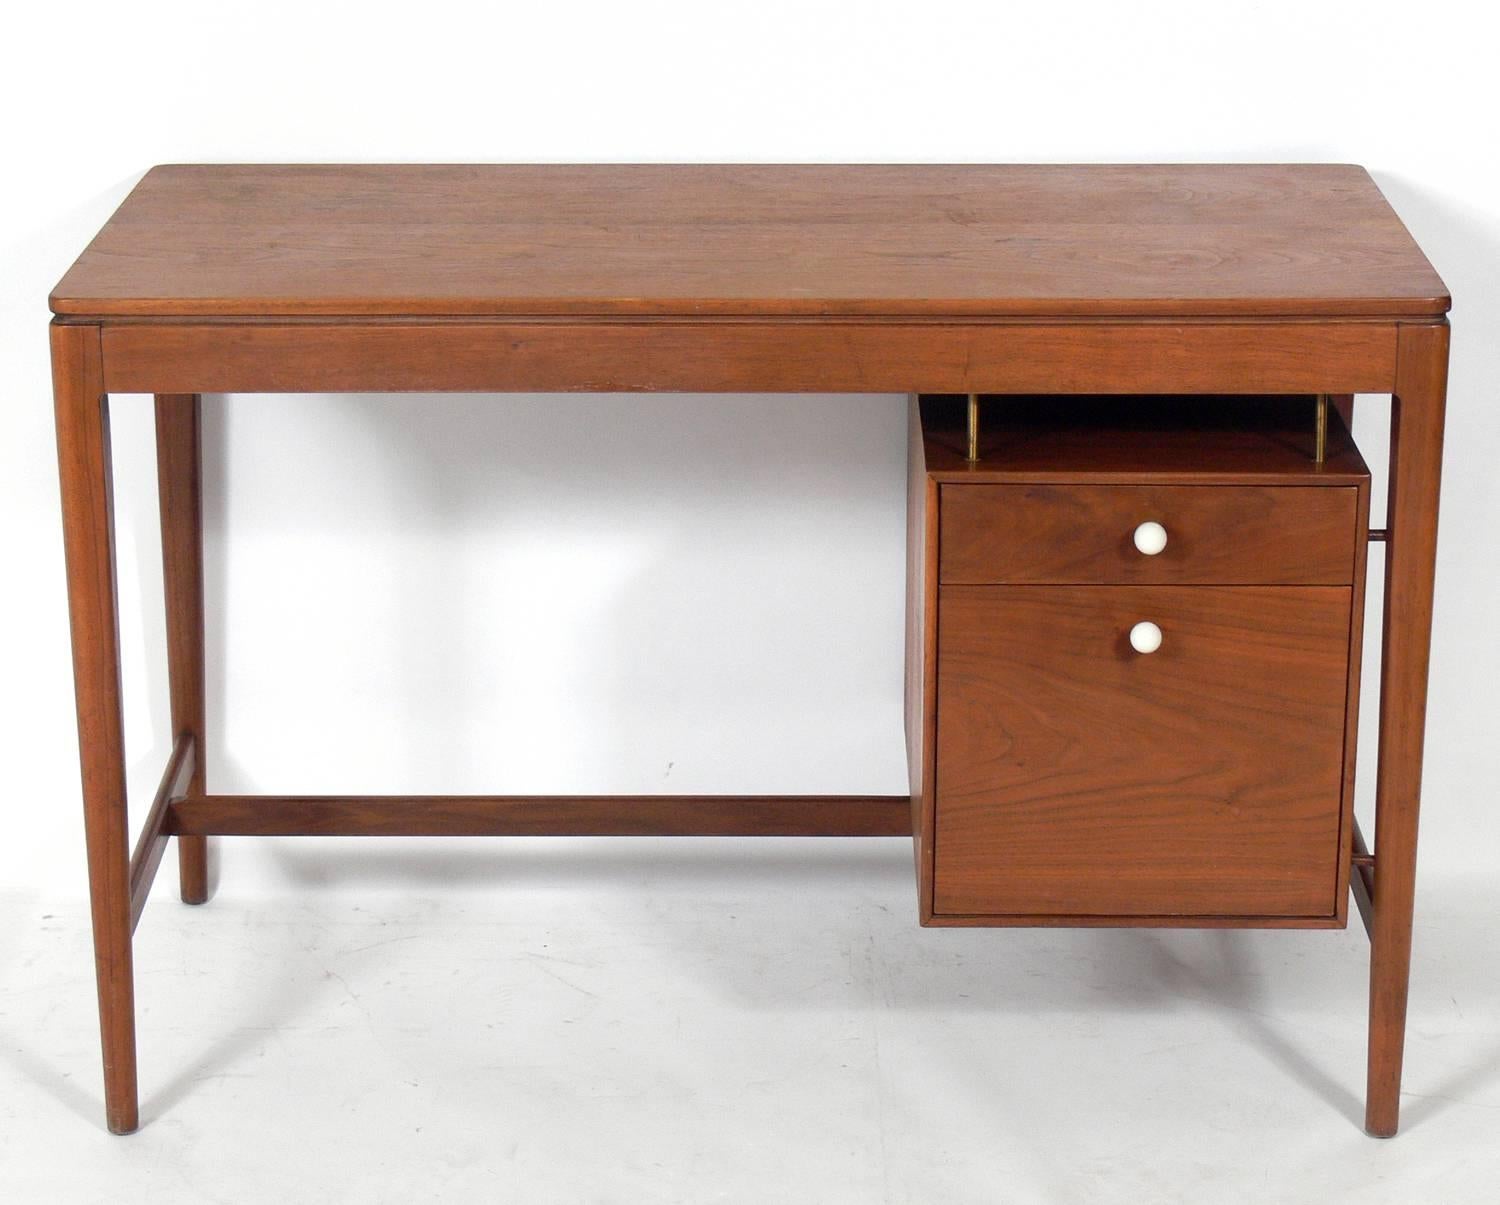 Clean lined walnut desk by Kipp Stewart for Drexel, American, circa 1960s. This piece is currently being refinished and will look incredible when it is completed.